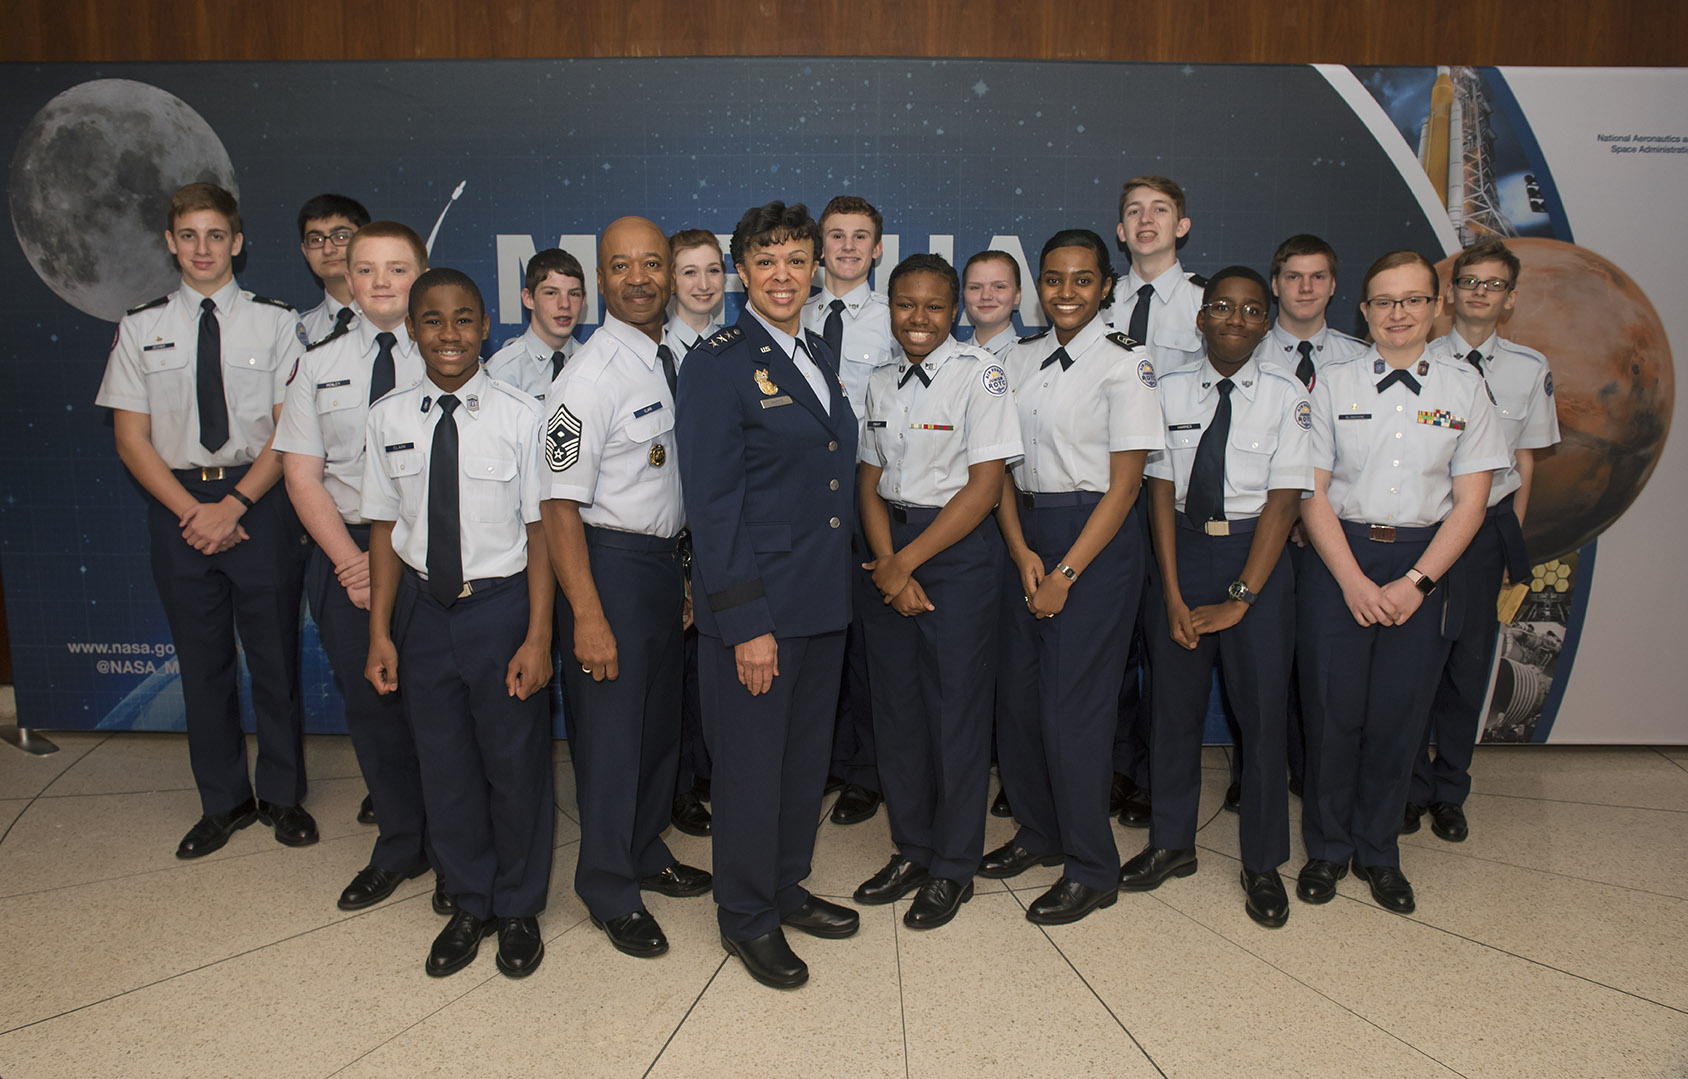 Lt. Gen. Stayce Harris, center, stopped to speak with a group of Junior Reserve Officer Training Corps cadets.